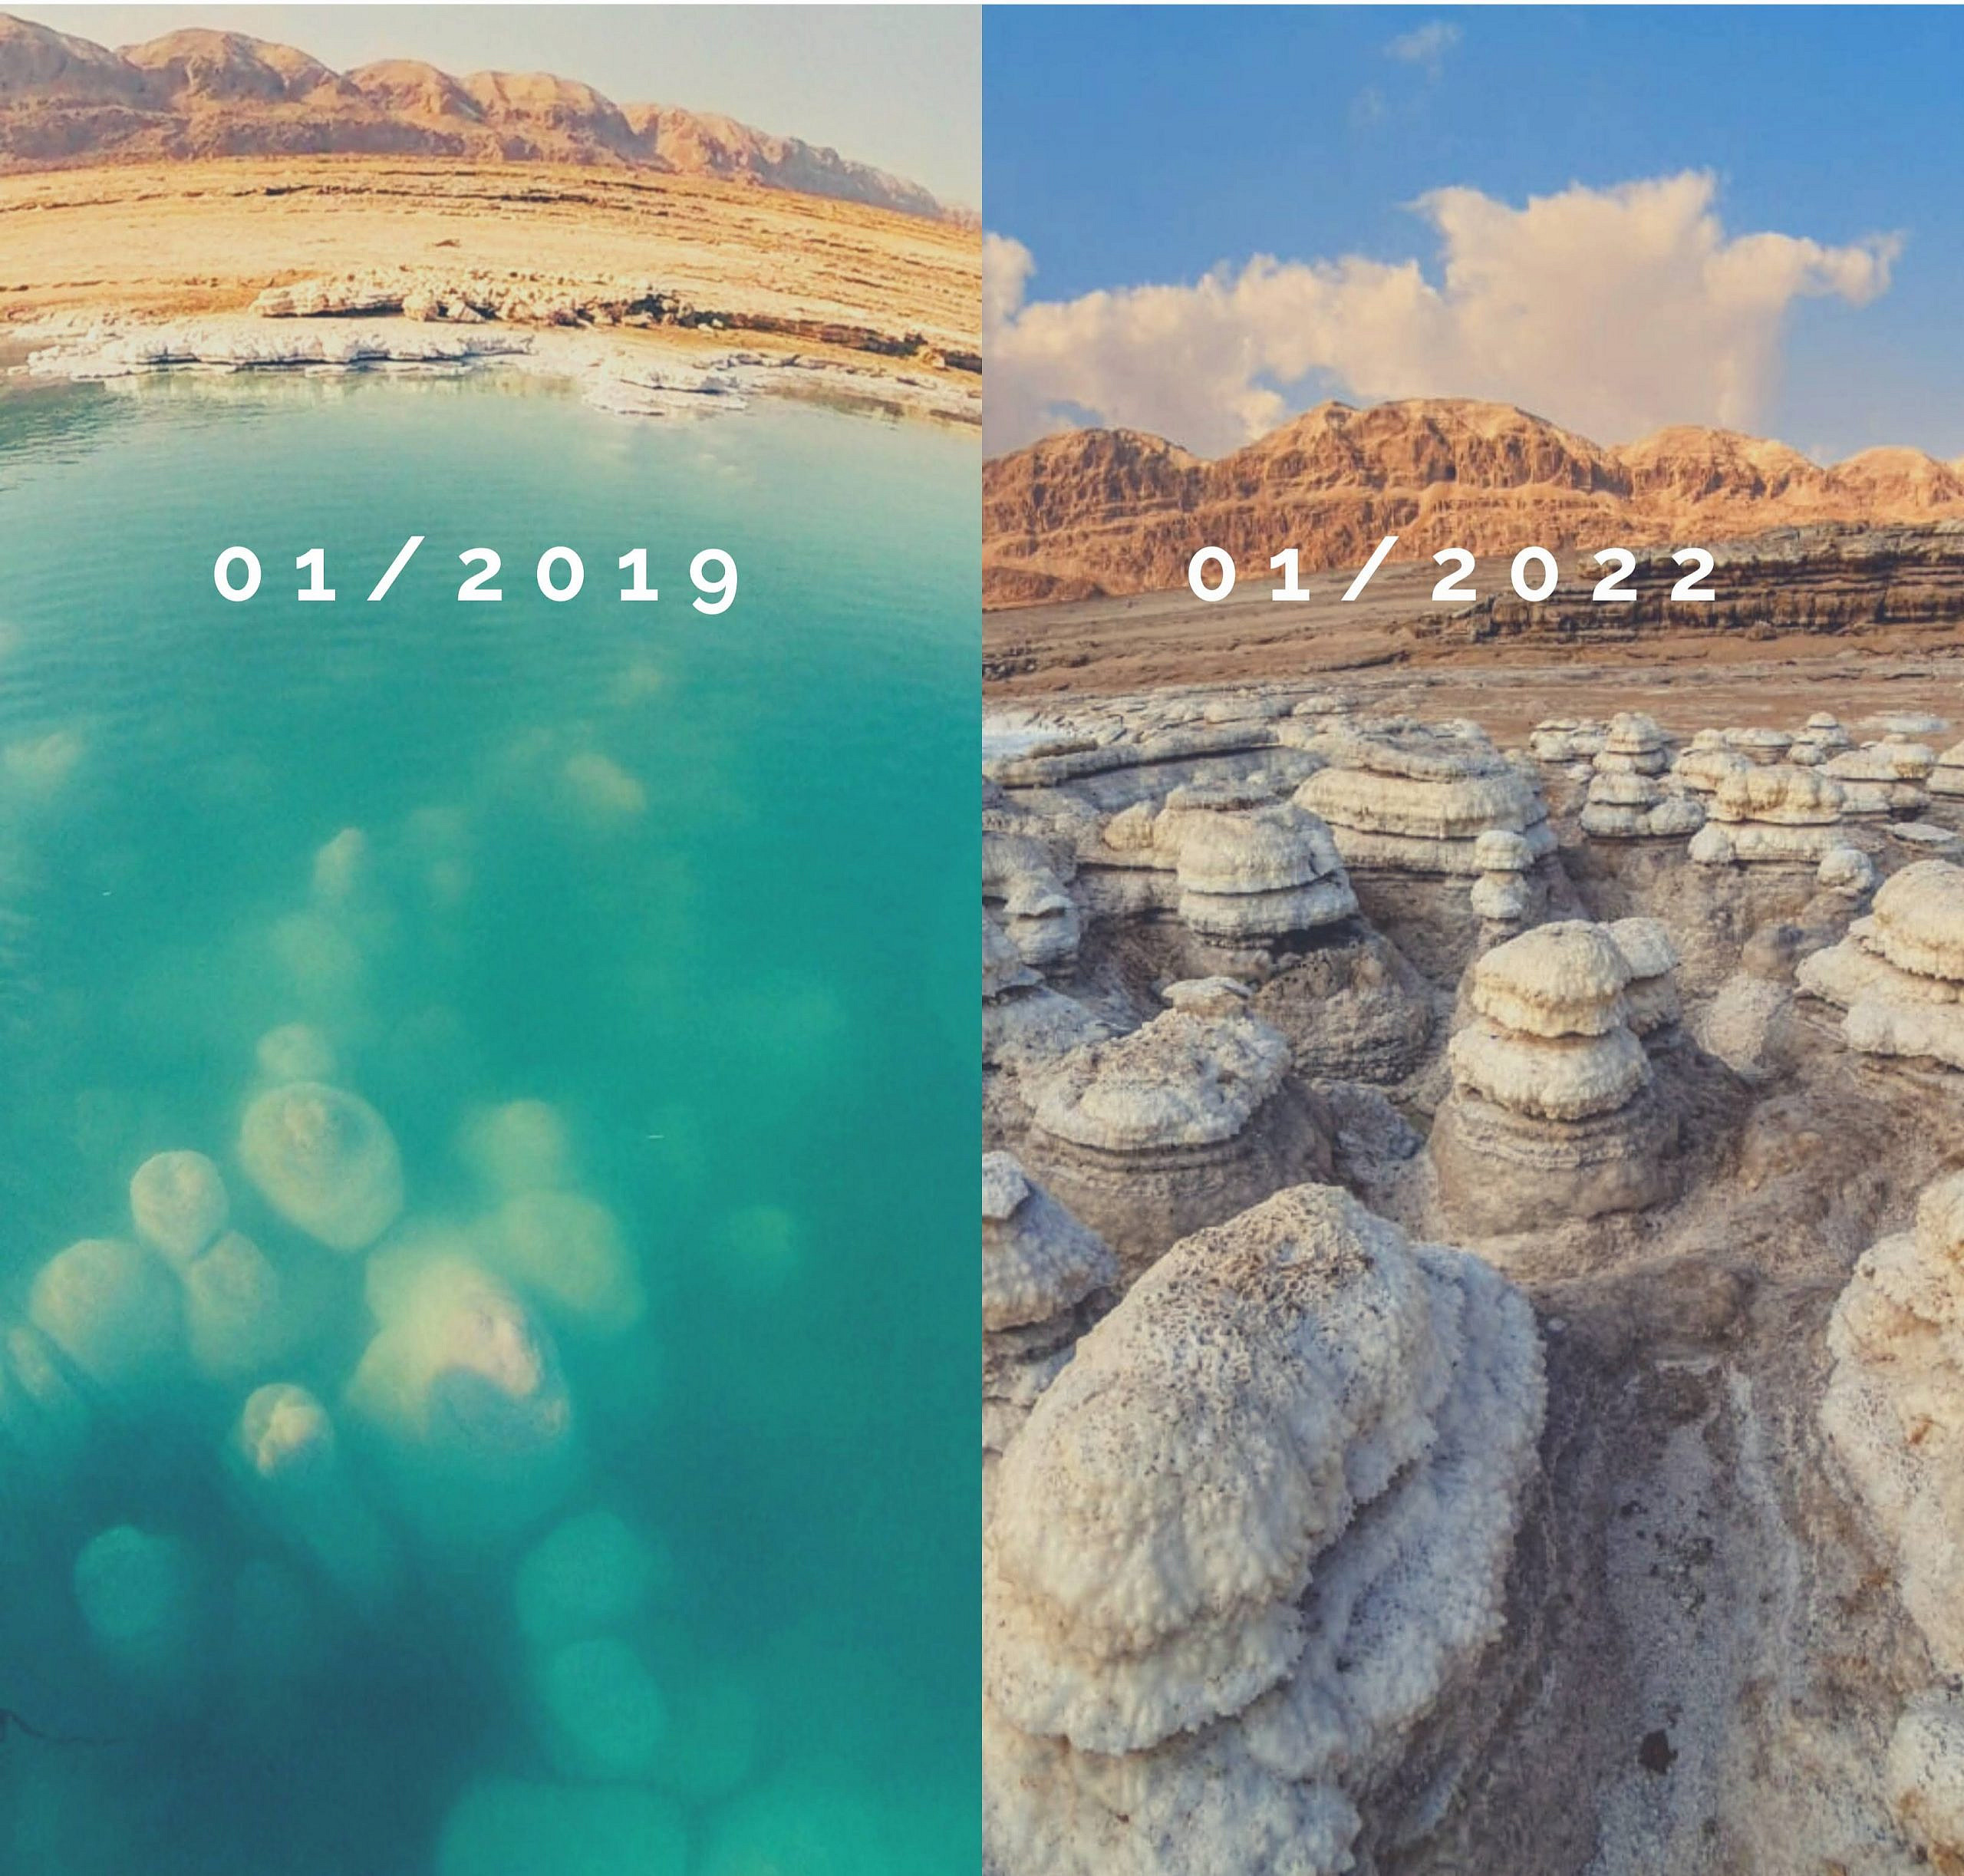 The Dead Sea - Image of the Week - Earth Watching